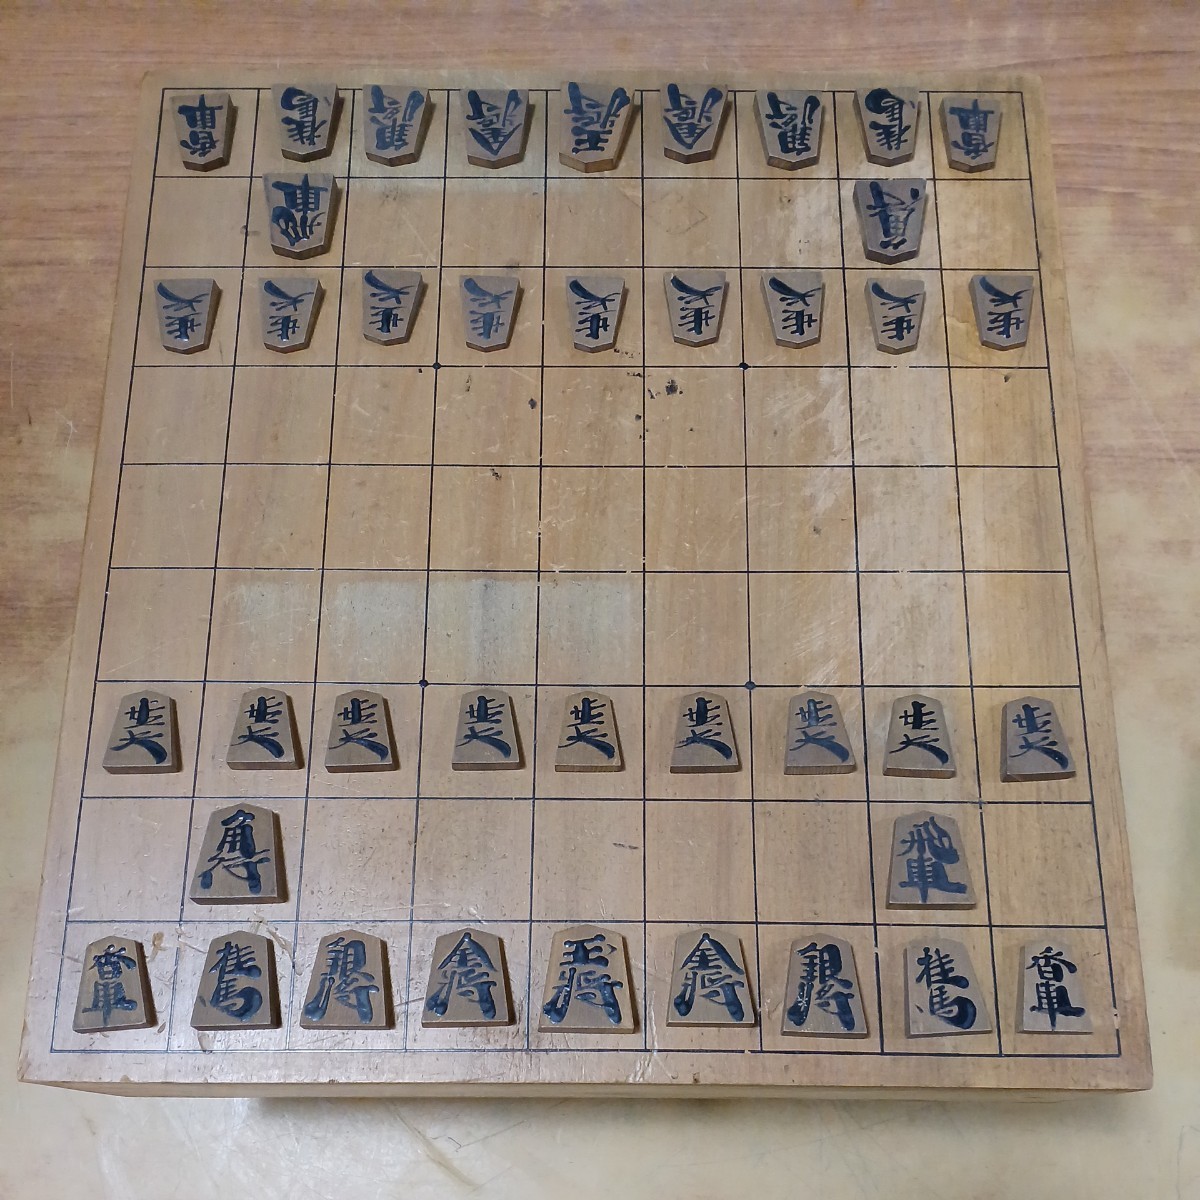  used long-term keeping goods retro shogi record shogi piece set pair attaching shogi record tree boxed tree piece wooden Vintage old Japanese-style house old .. purity? scratch dirt equipped present condition goods 